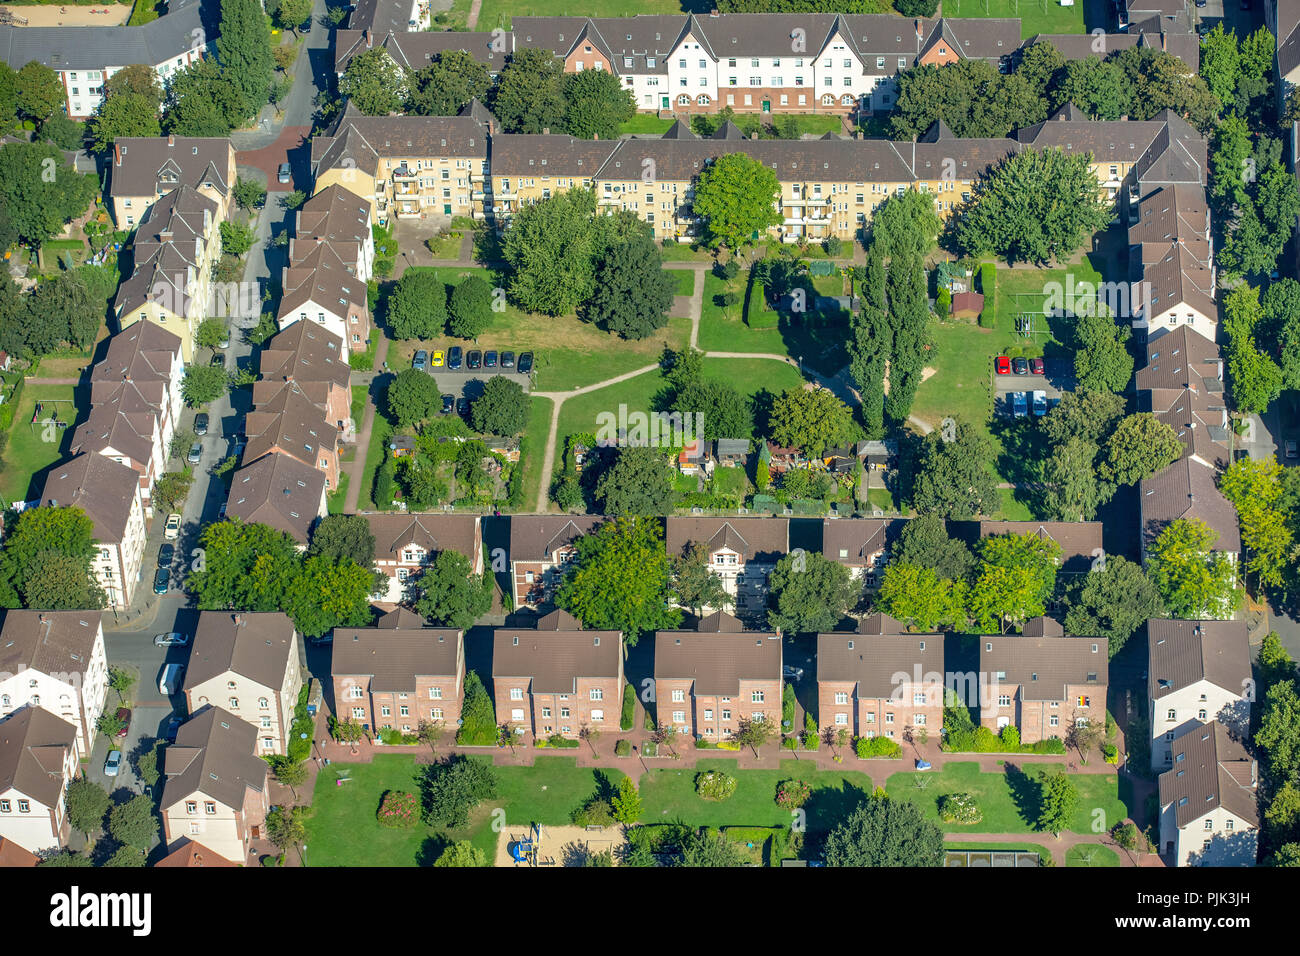 Aerial view, Duisburg-Hamborn Dichterviertel, historical colliery estate, urban square structure, colliery houses, Duisburg, Ruhr area, North Rhine-Westphalia, Germany Stock Photo